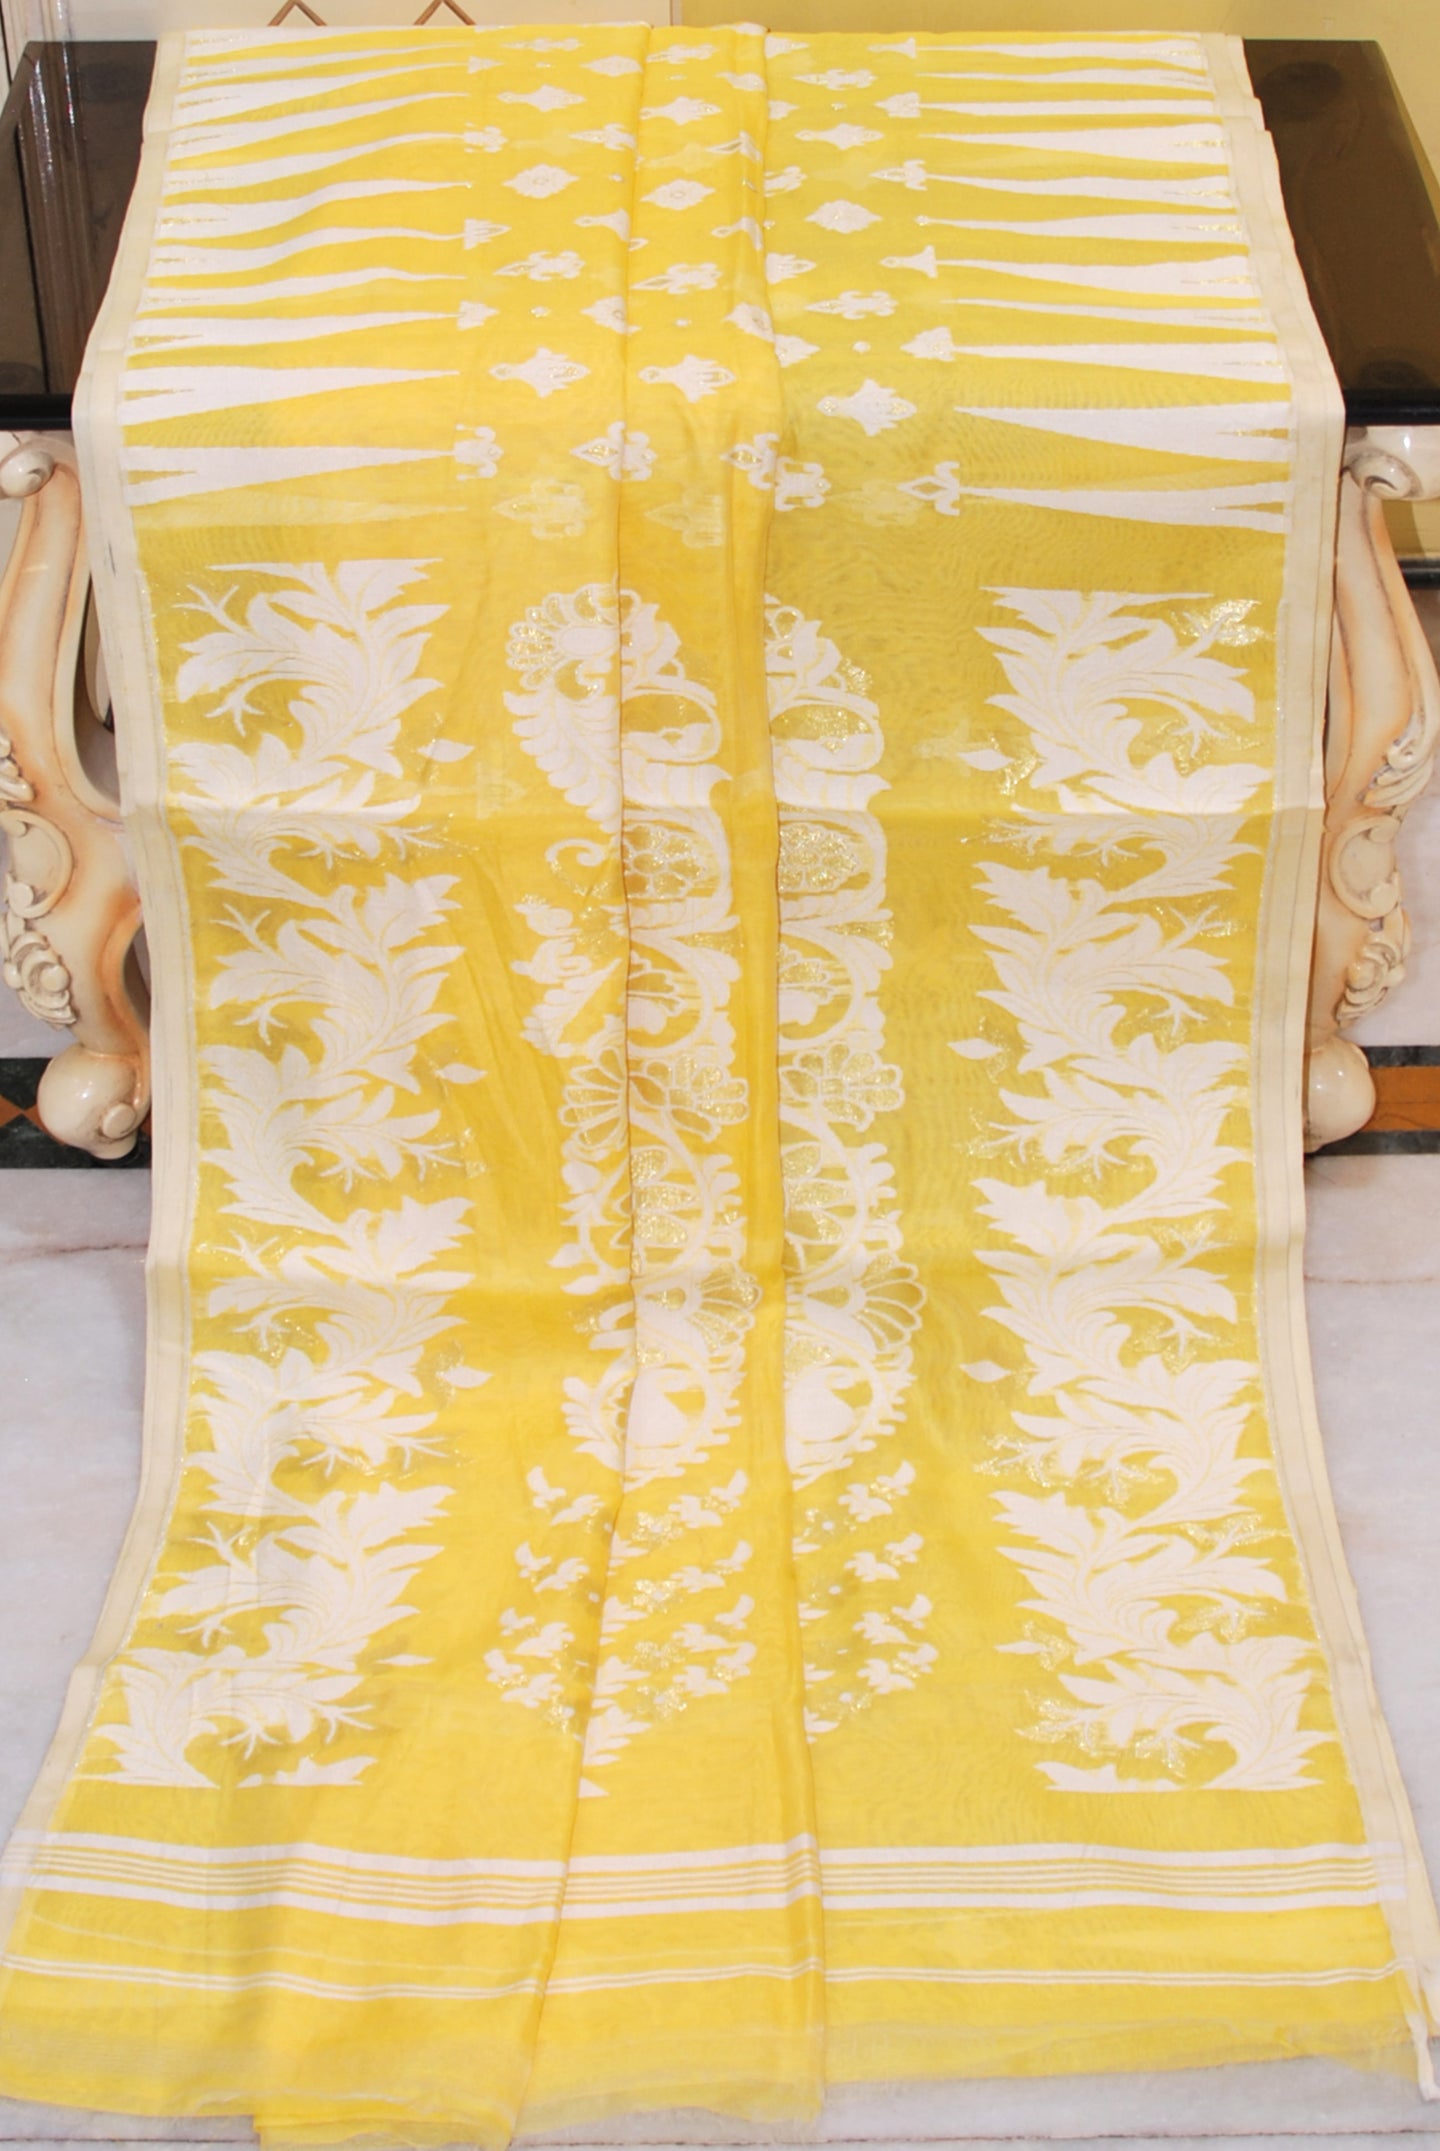 Temple Border Cotton Muslin Soft Jamdani Saree in Light Yellow, Off White and Gold